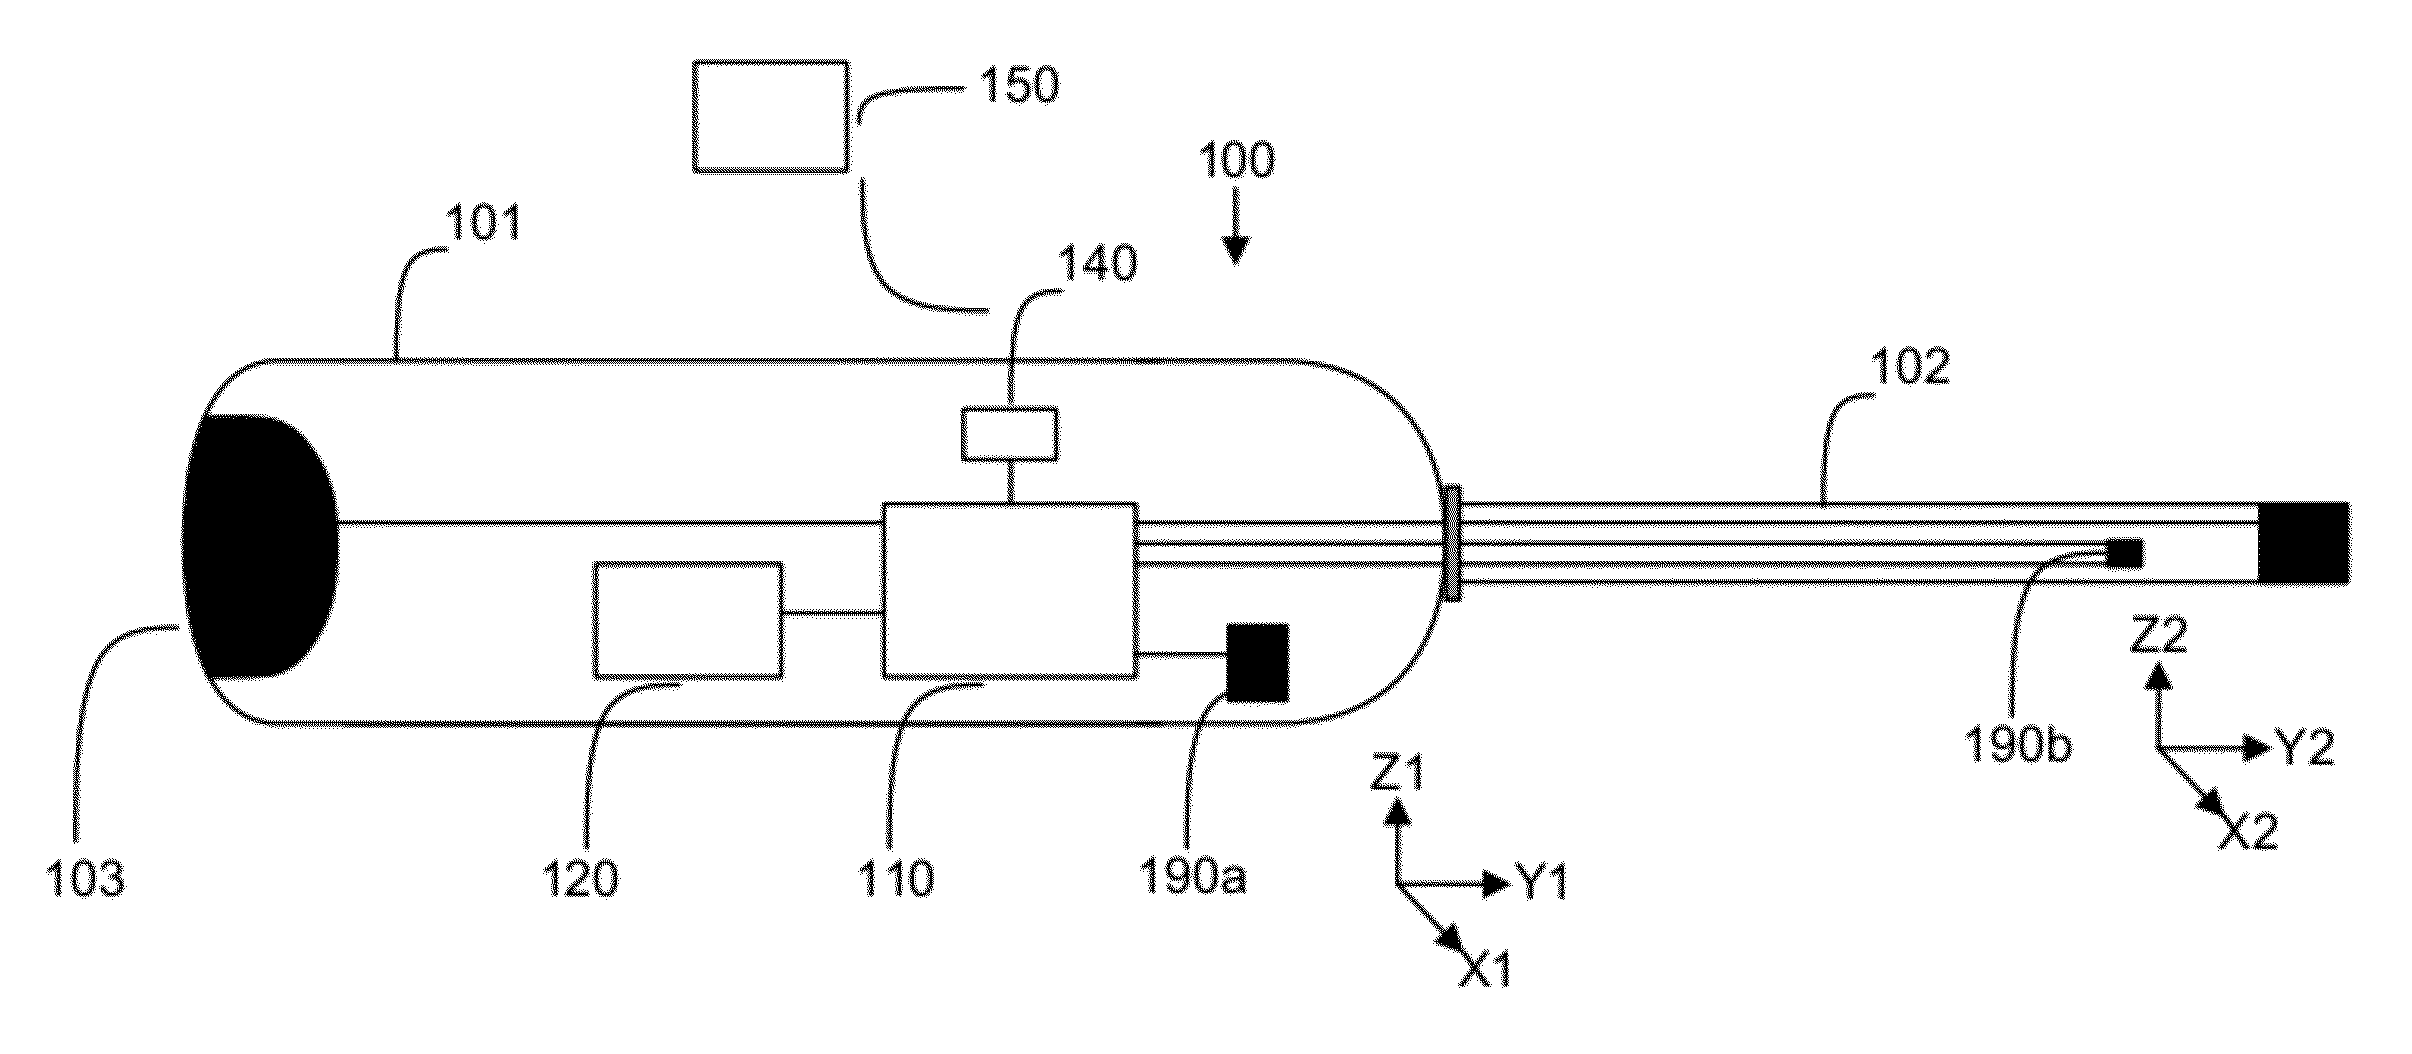 Implantable apparatus for detection of external noise using motion sensor signal